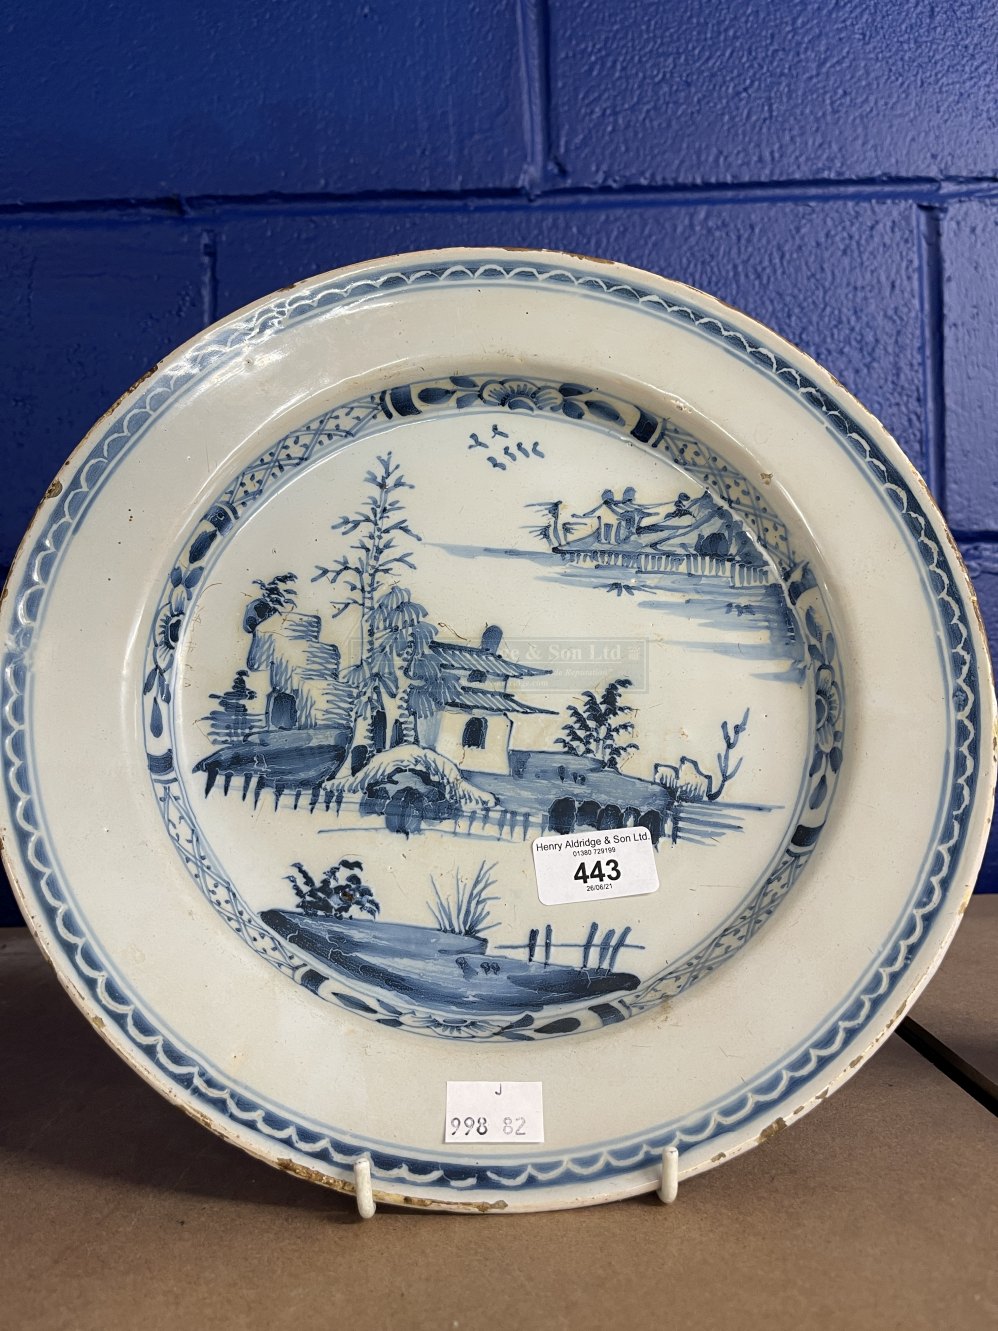 Ceramics: 18th cent. Tin glaze earthenware Delft charger decorated in the Chinese style. 12ins.